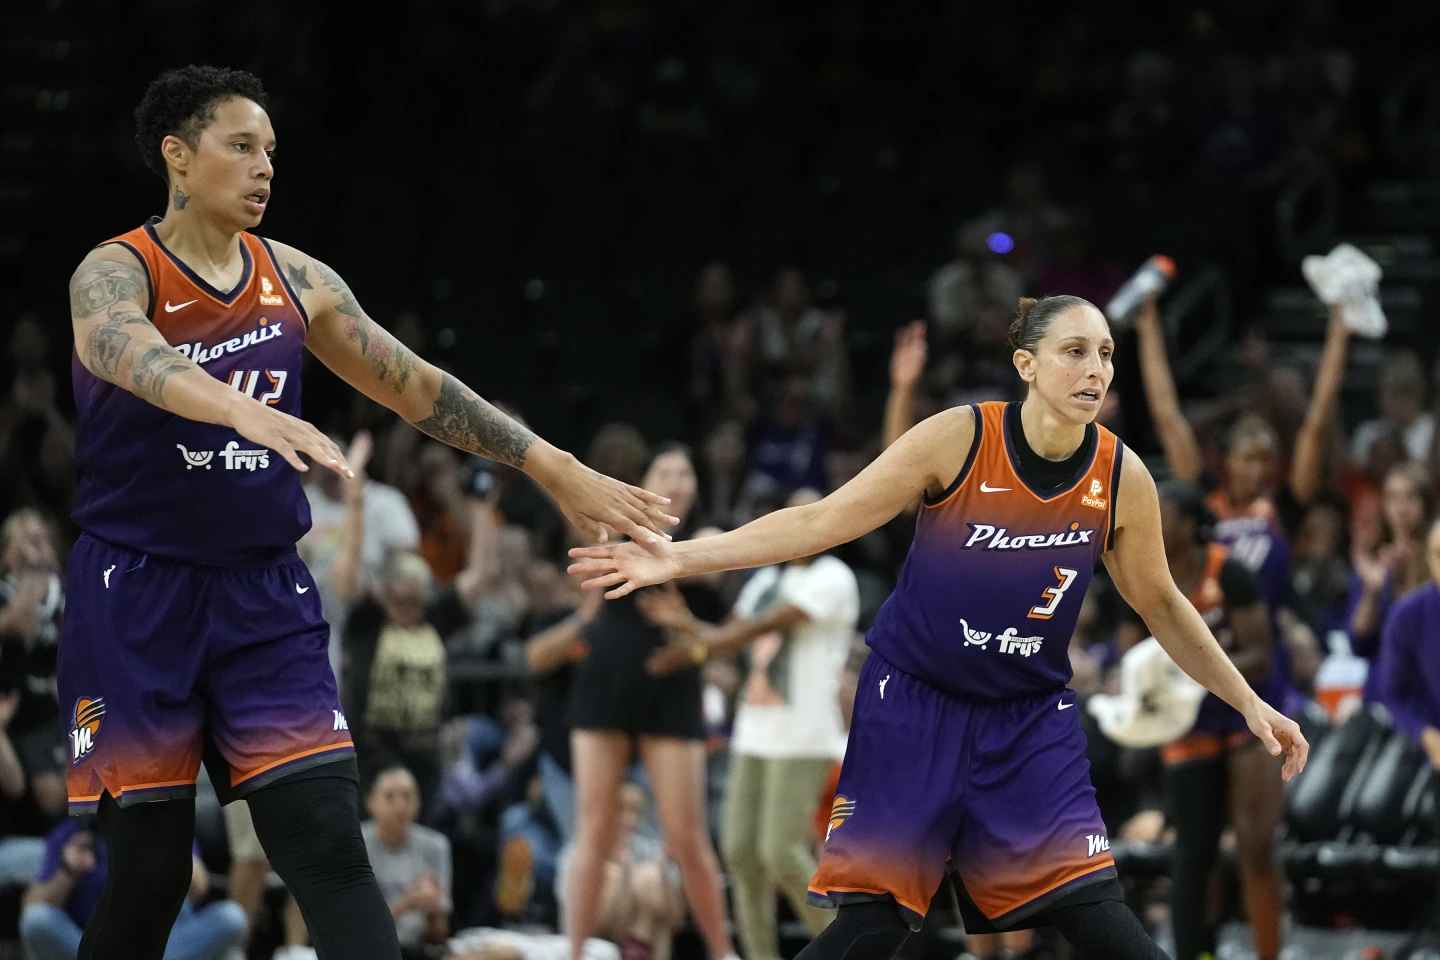 On Thursday, May 25, 2023, in Phoenix, Phoenix Mercury center Brittney Griner, left, celebrates a score by guard Diana Taurasi (3) during the second half of the team's WNBA basketball game against the Minnesota Lynx. Diana Taurasi and Brittney Griner lead the USA Basketball Women's National Team roster of 16 players revealed Thursday, Oct. 26, 2023, for a pair of November exhibition games and a training camp in Atlanta. (Photo by Ross D. Franklin)